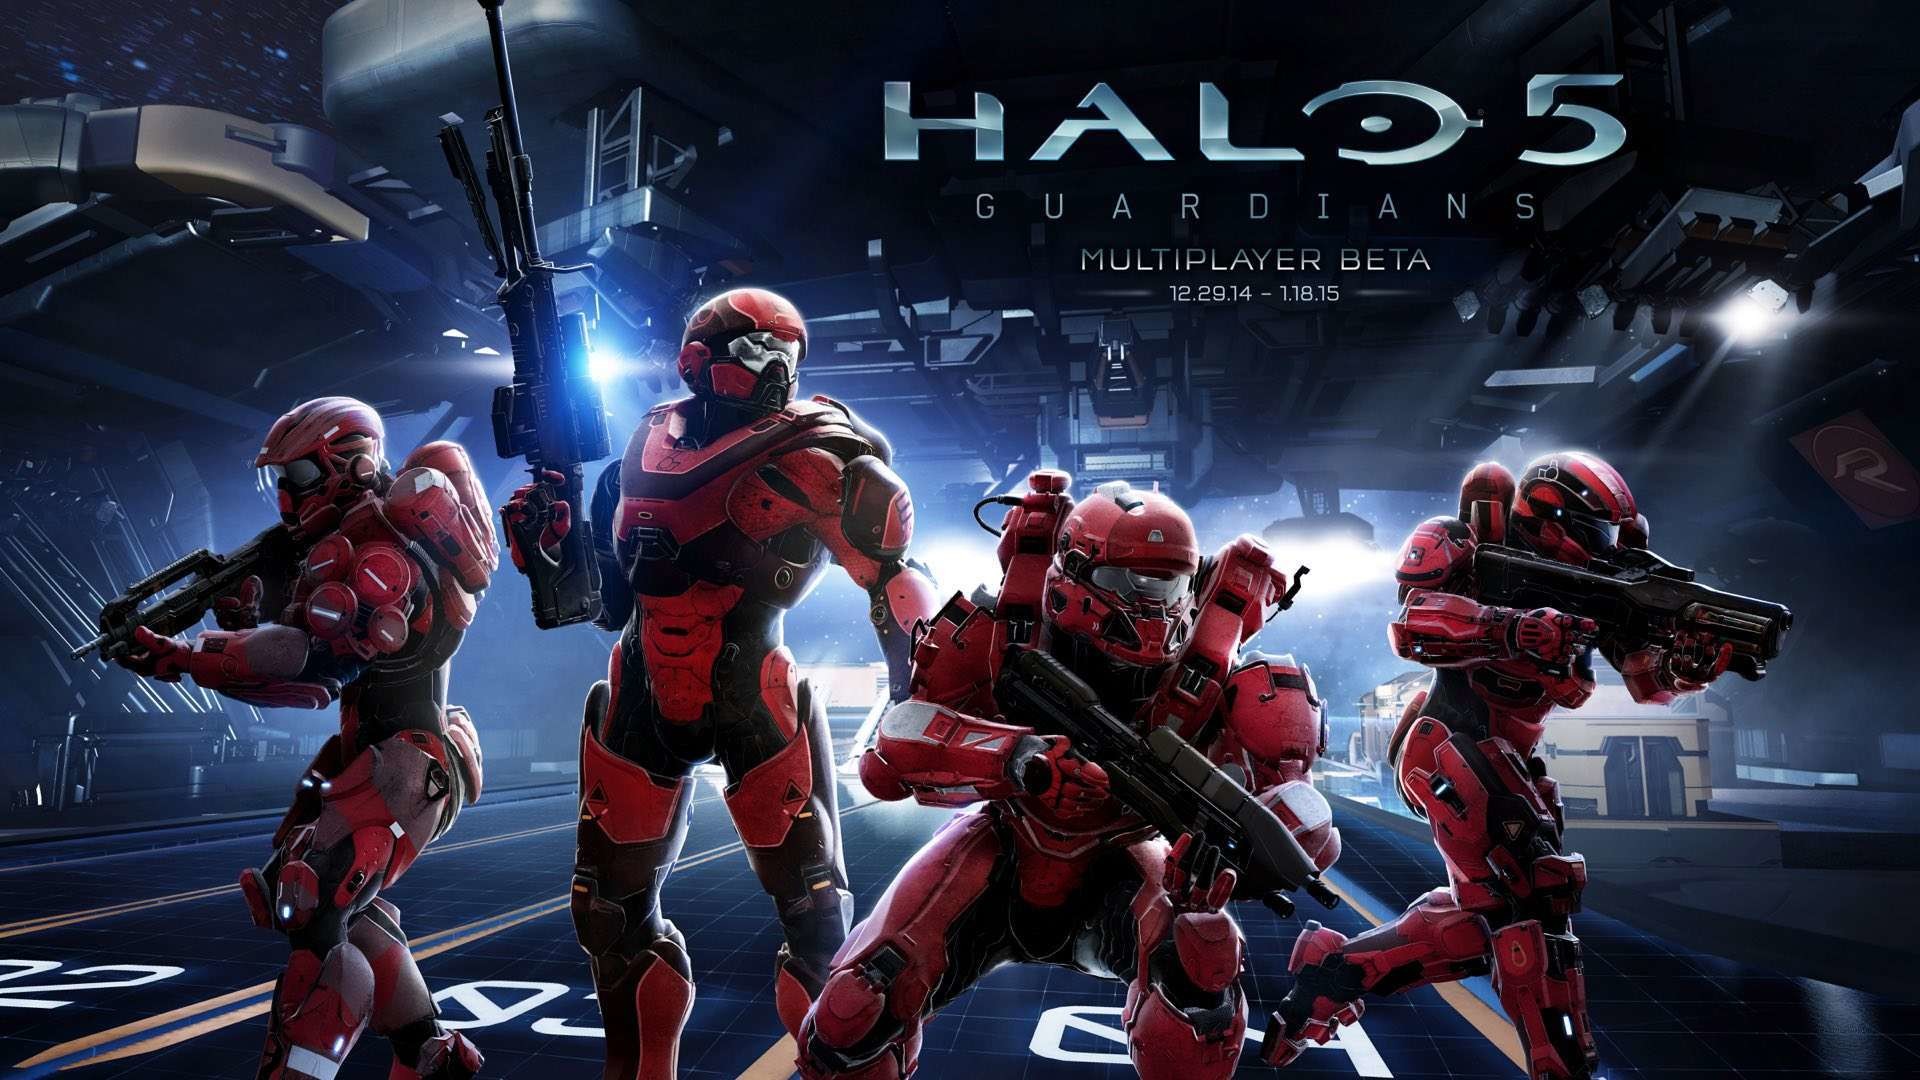 1920x1080 Halo 5 Guardians HD Wallpapers.